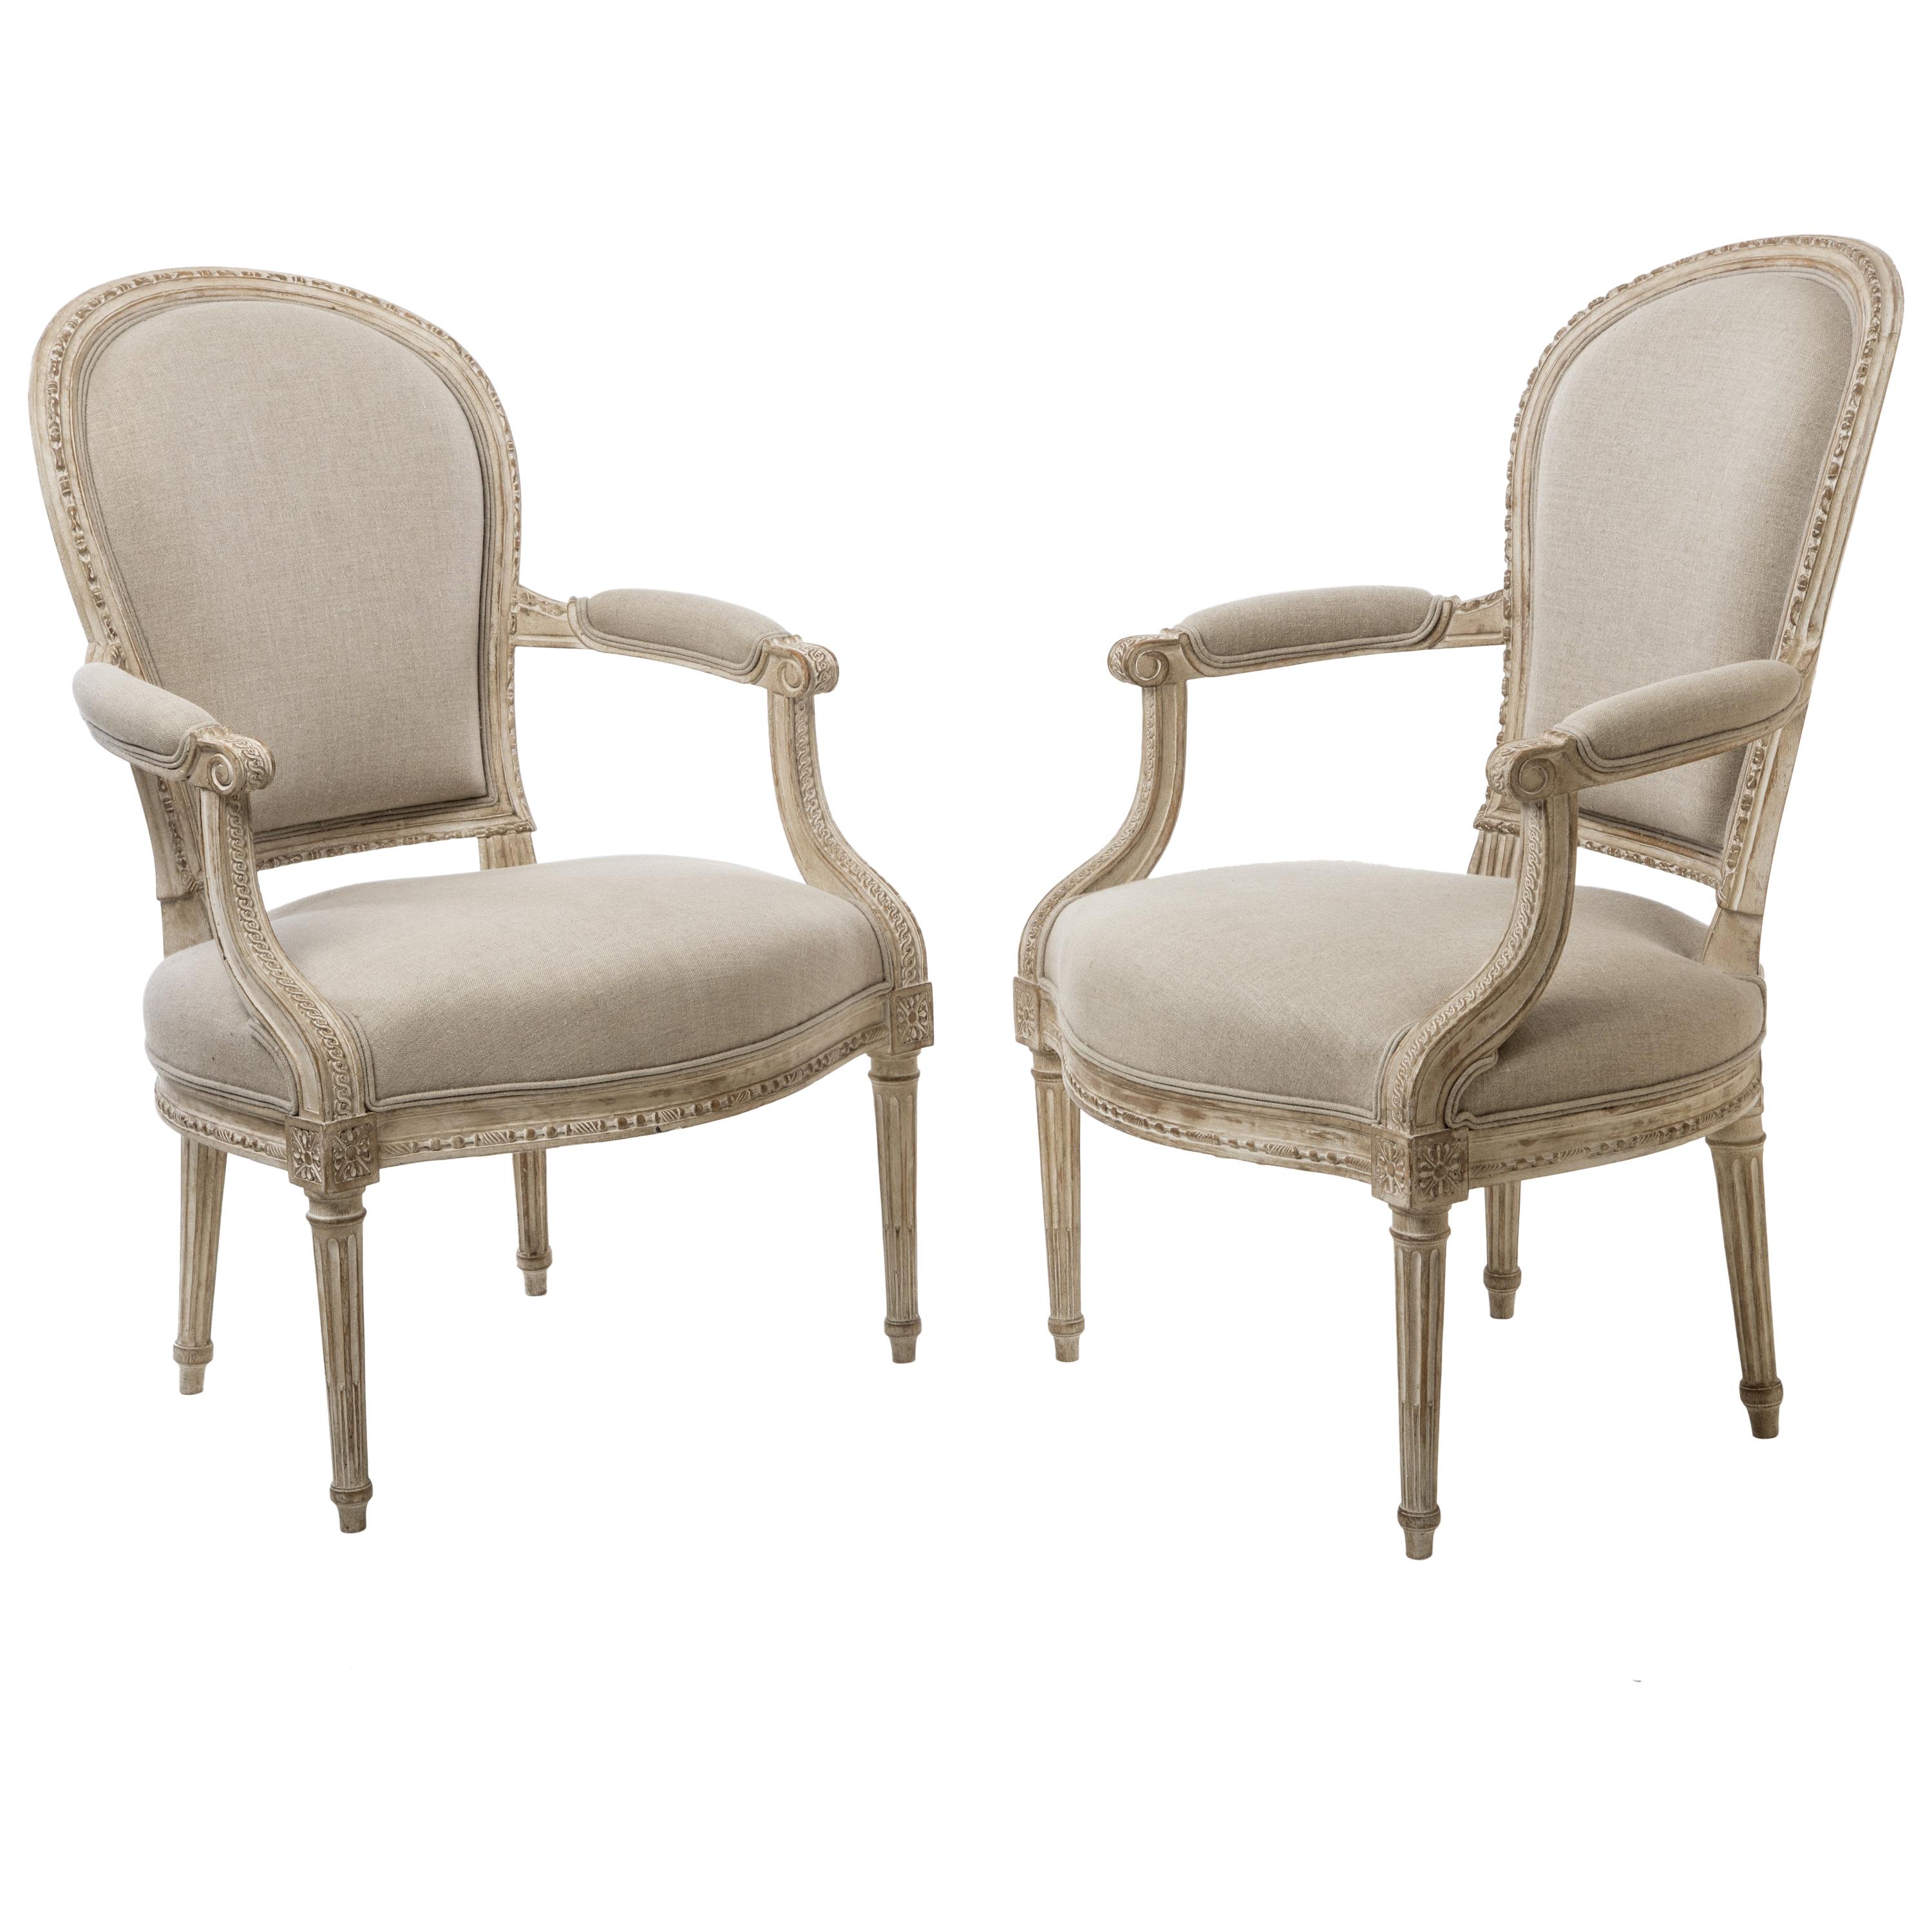 Pair of Delaisement Cabriolet Armchairs in the Style of Louis XVI